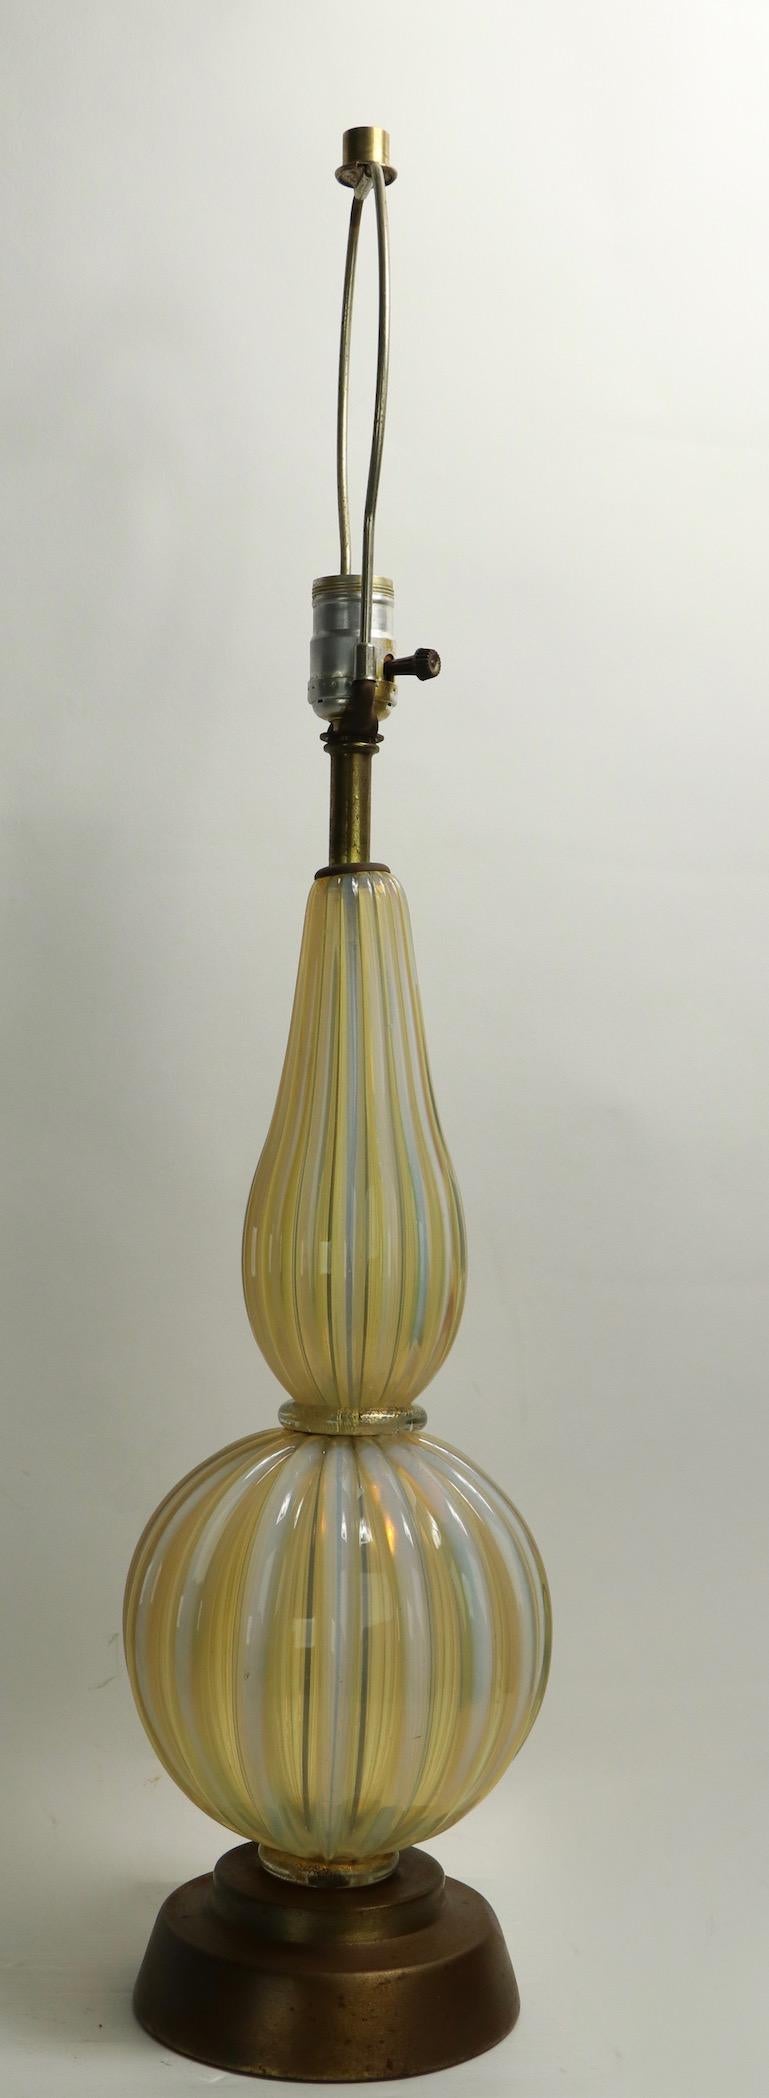 Italian Pair of Murano Table Lamps Attributed to Barovier